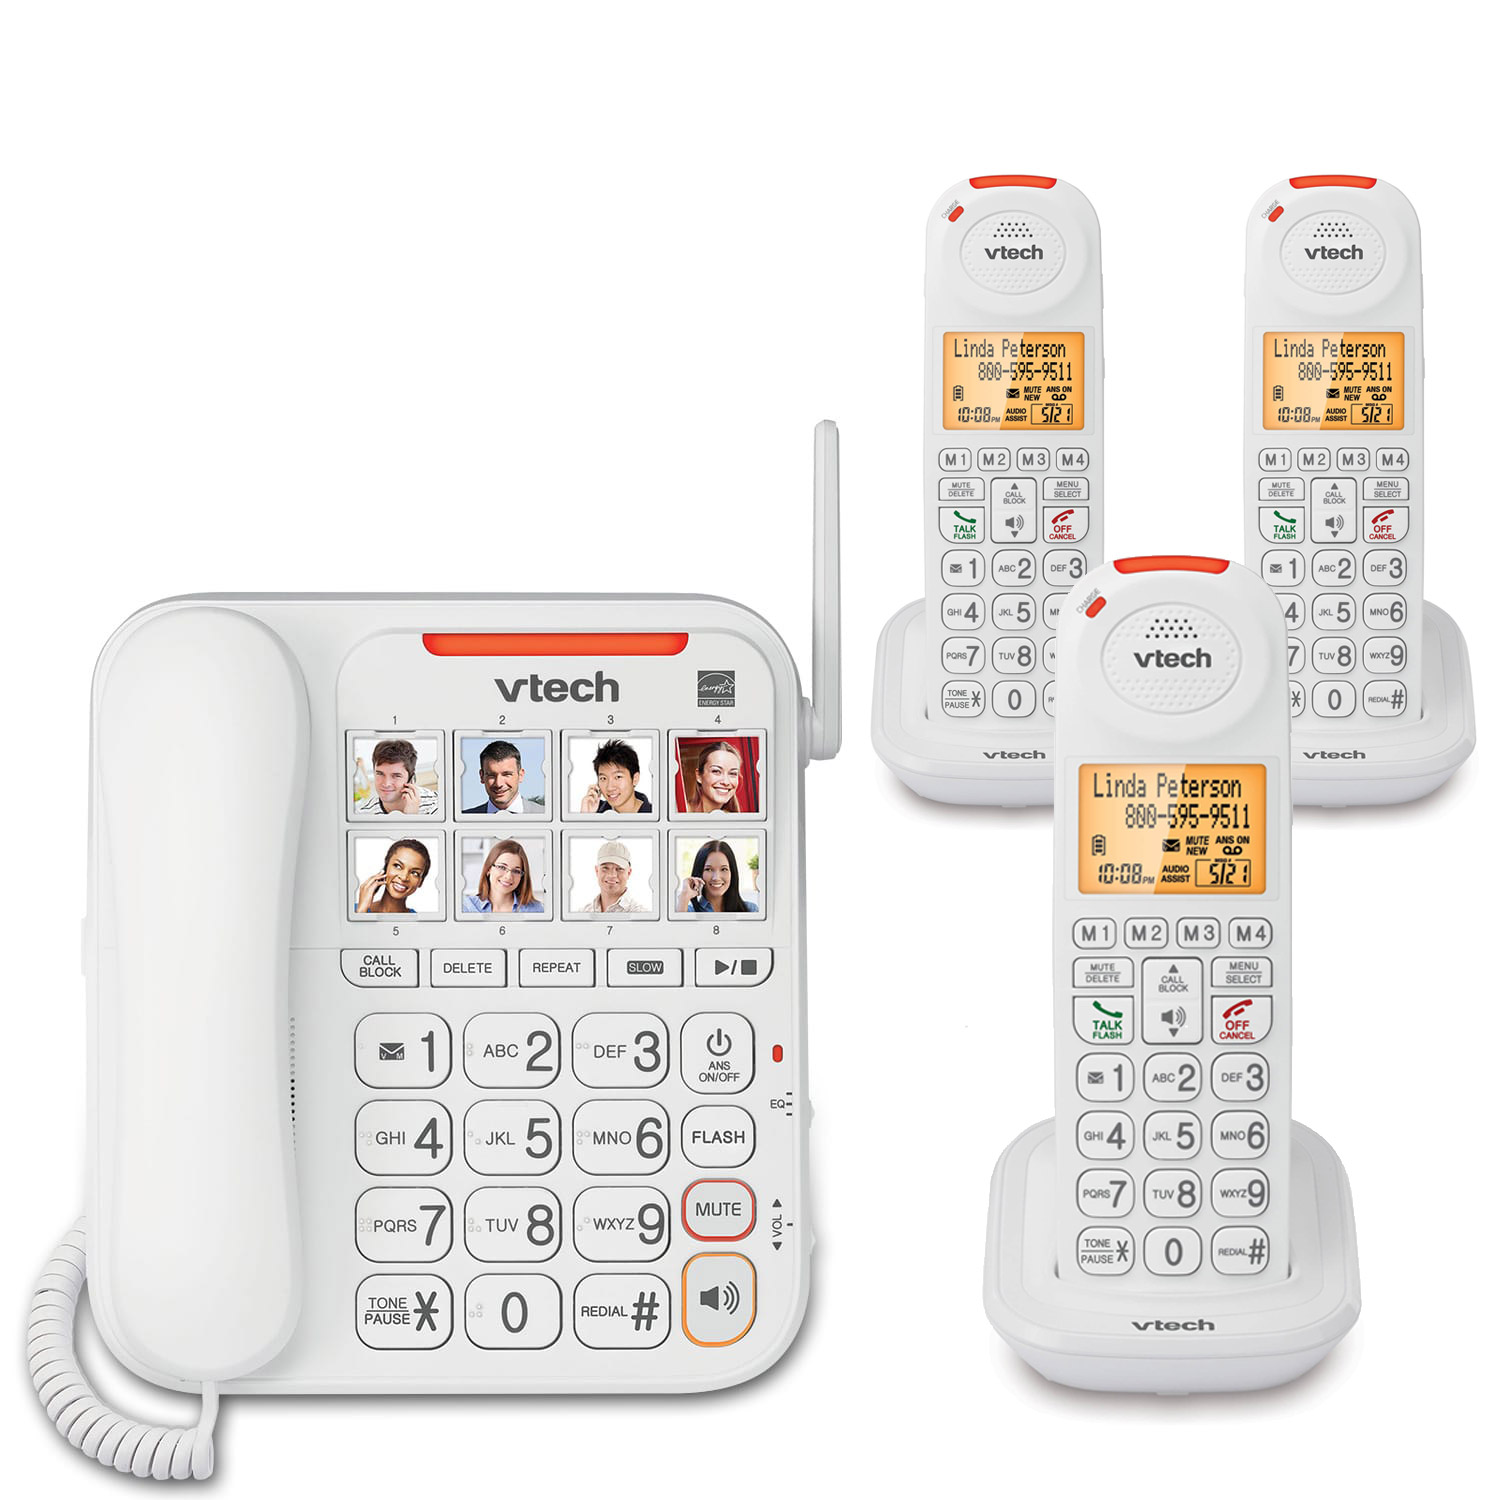 3 Handset Amplified Corded/Cordless Answering System - view 1